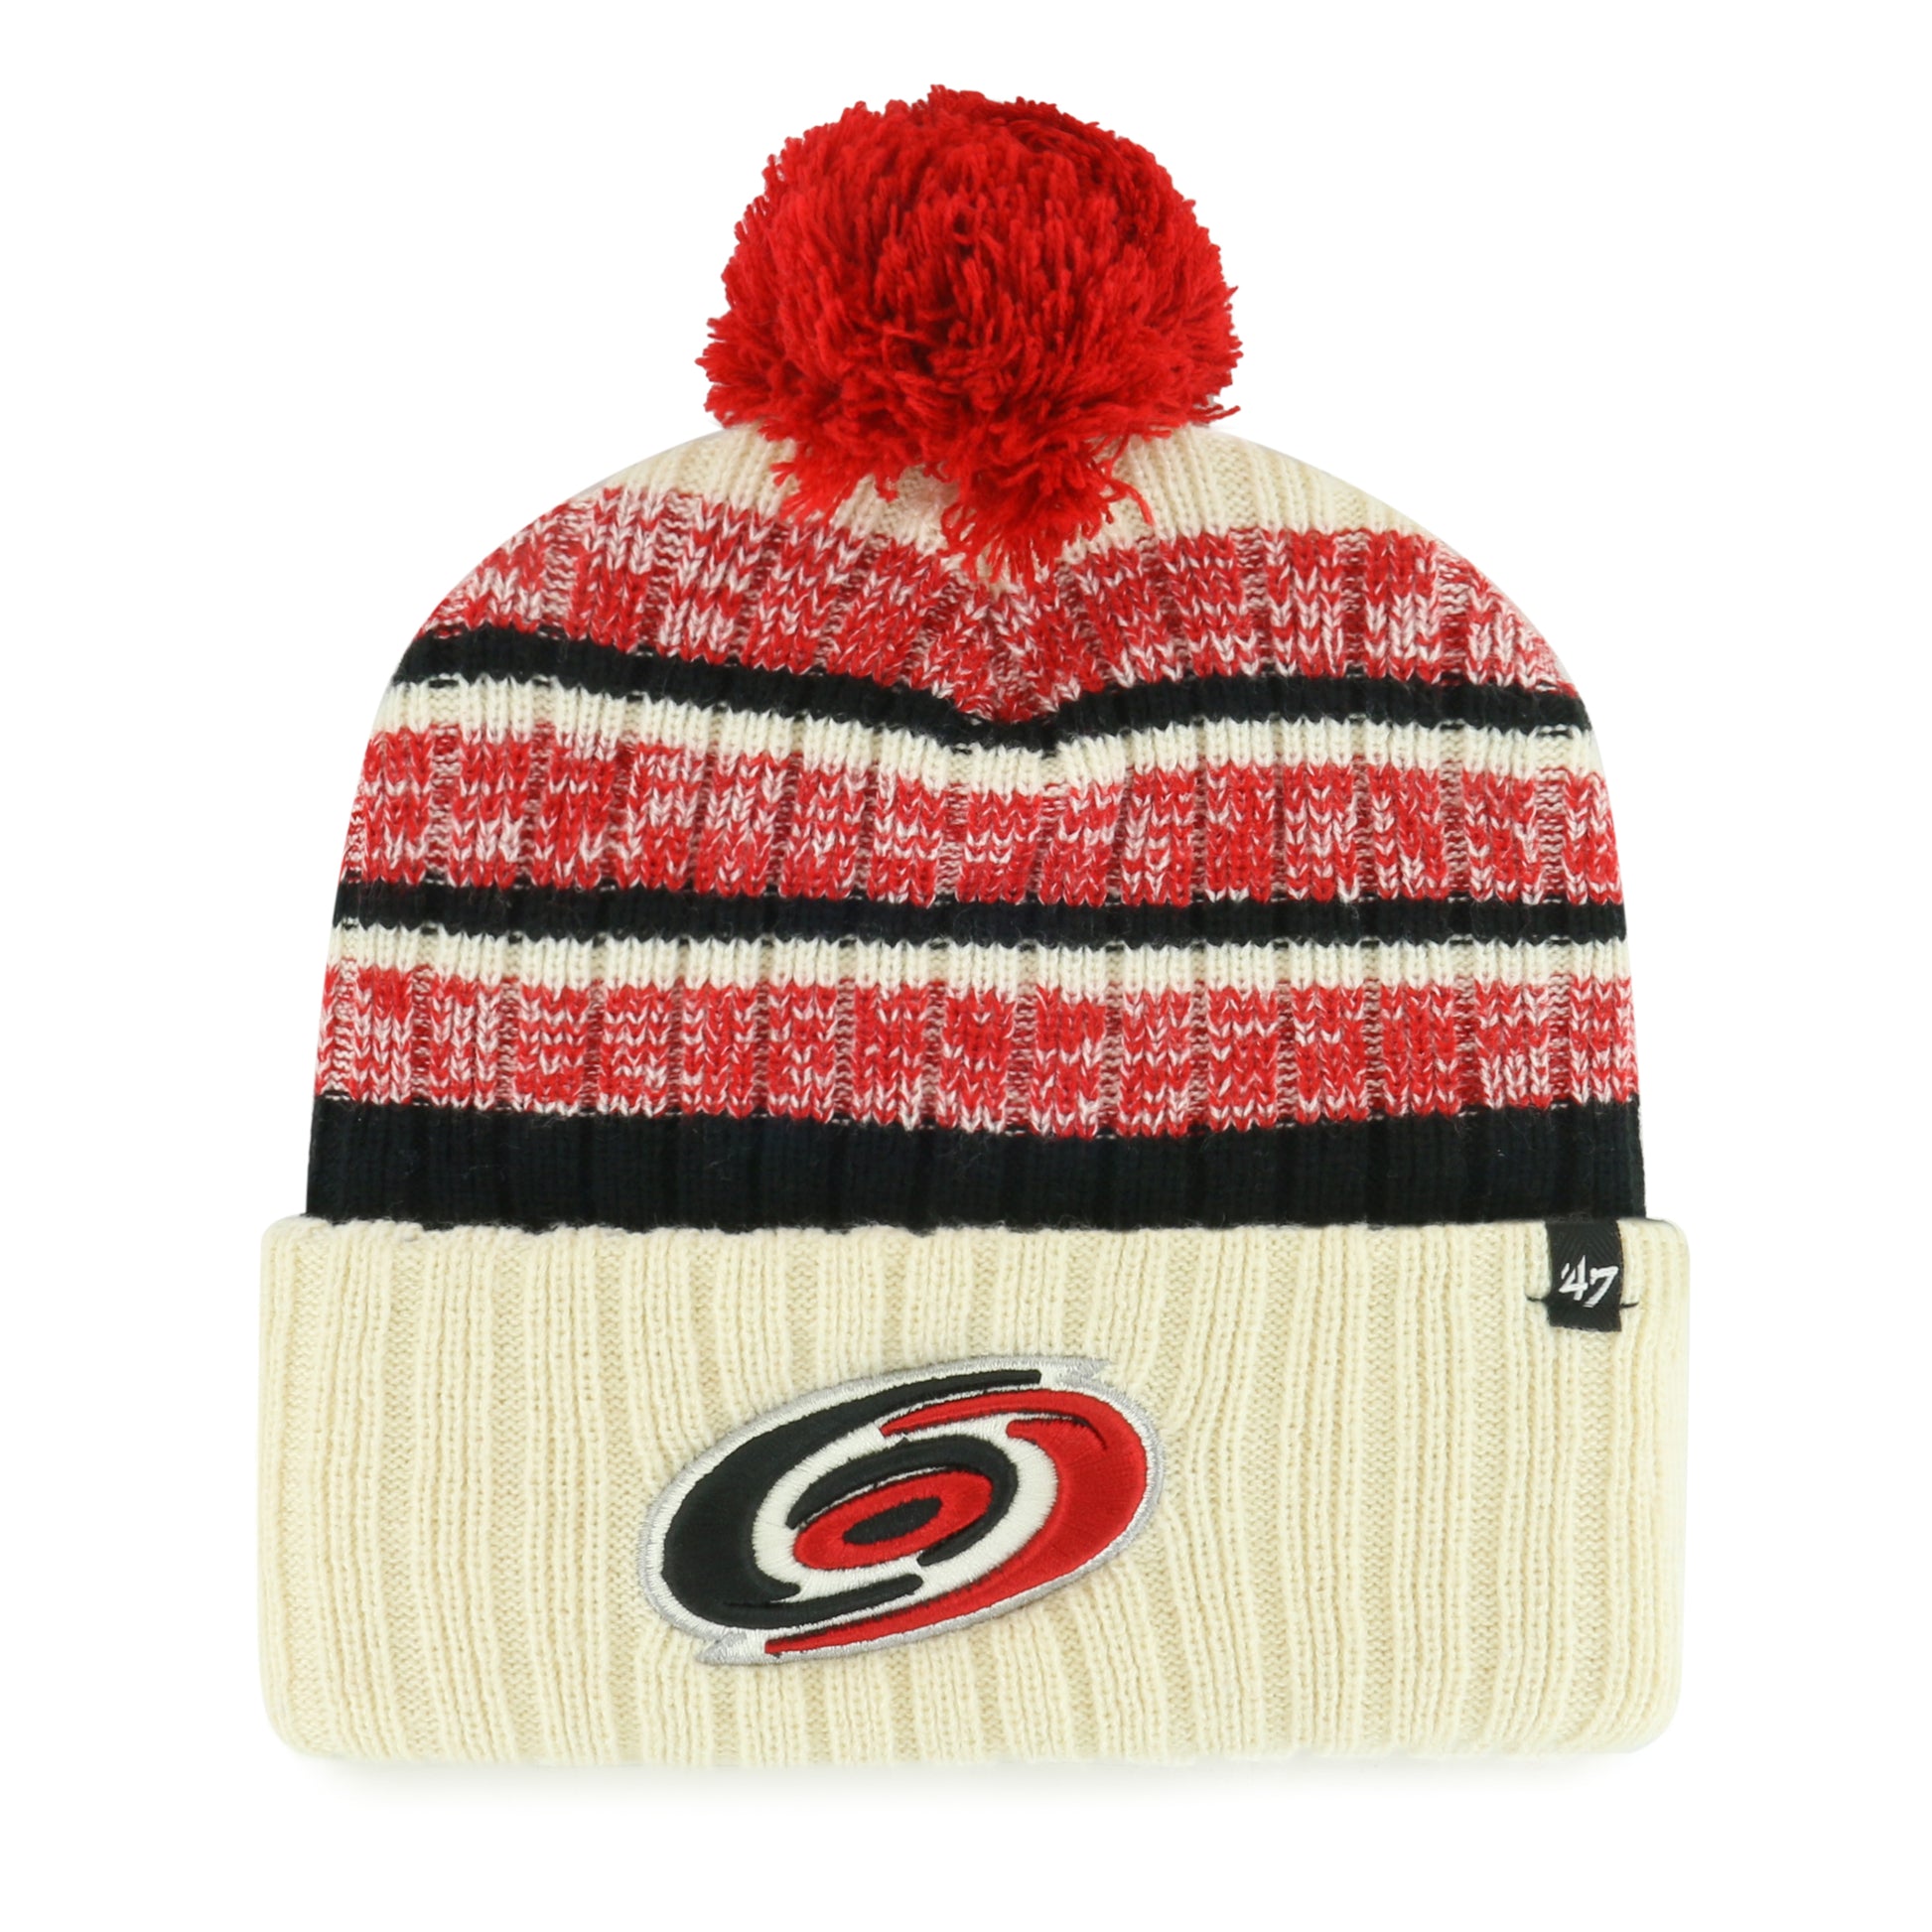 Front: Cream black and red cuffed beanie with red pom and Hurricanes logo